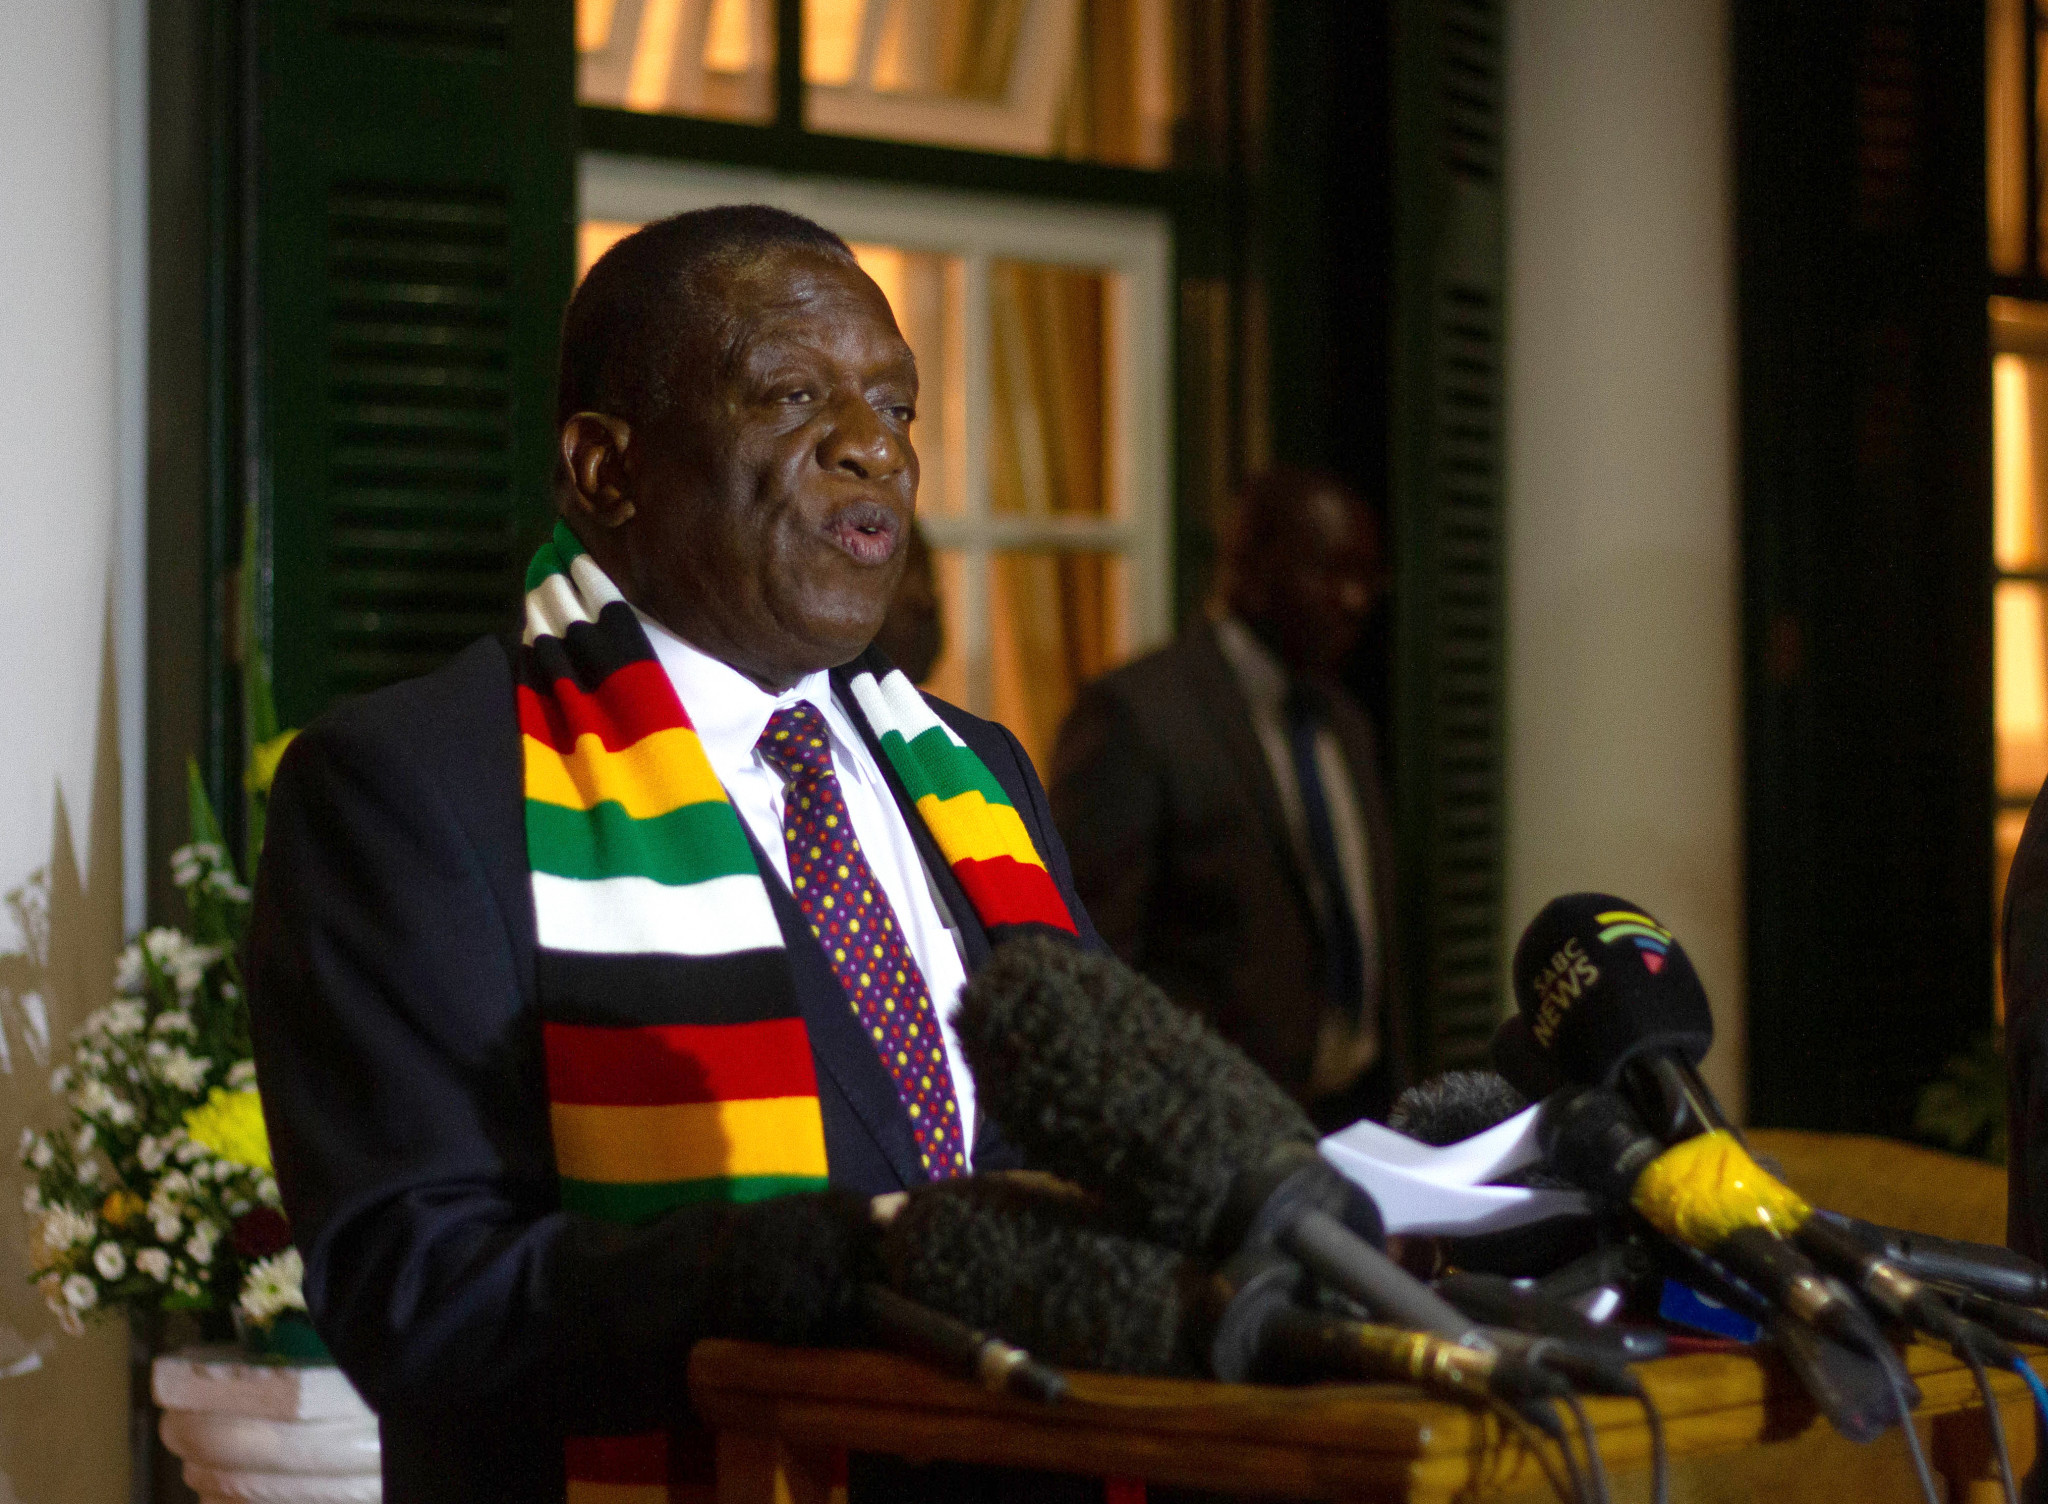 President Emmerson Mnangagwa applied for Zimbabwe to be re-admitted to the Commonwealth of Nations in 2018 ©Getty Images